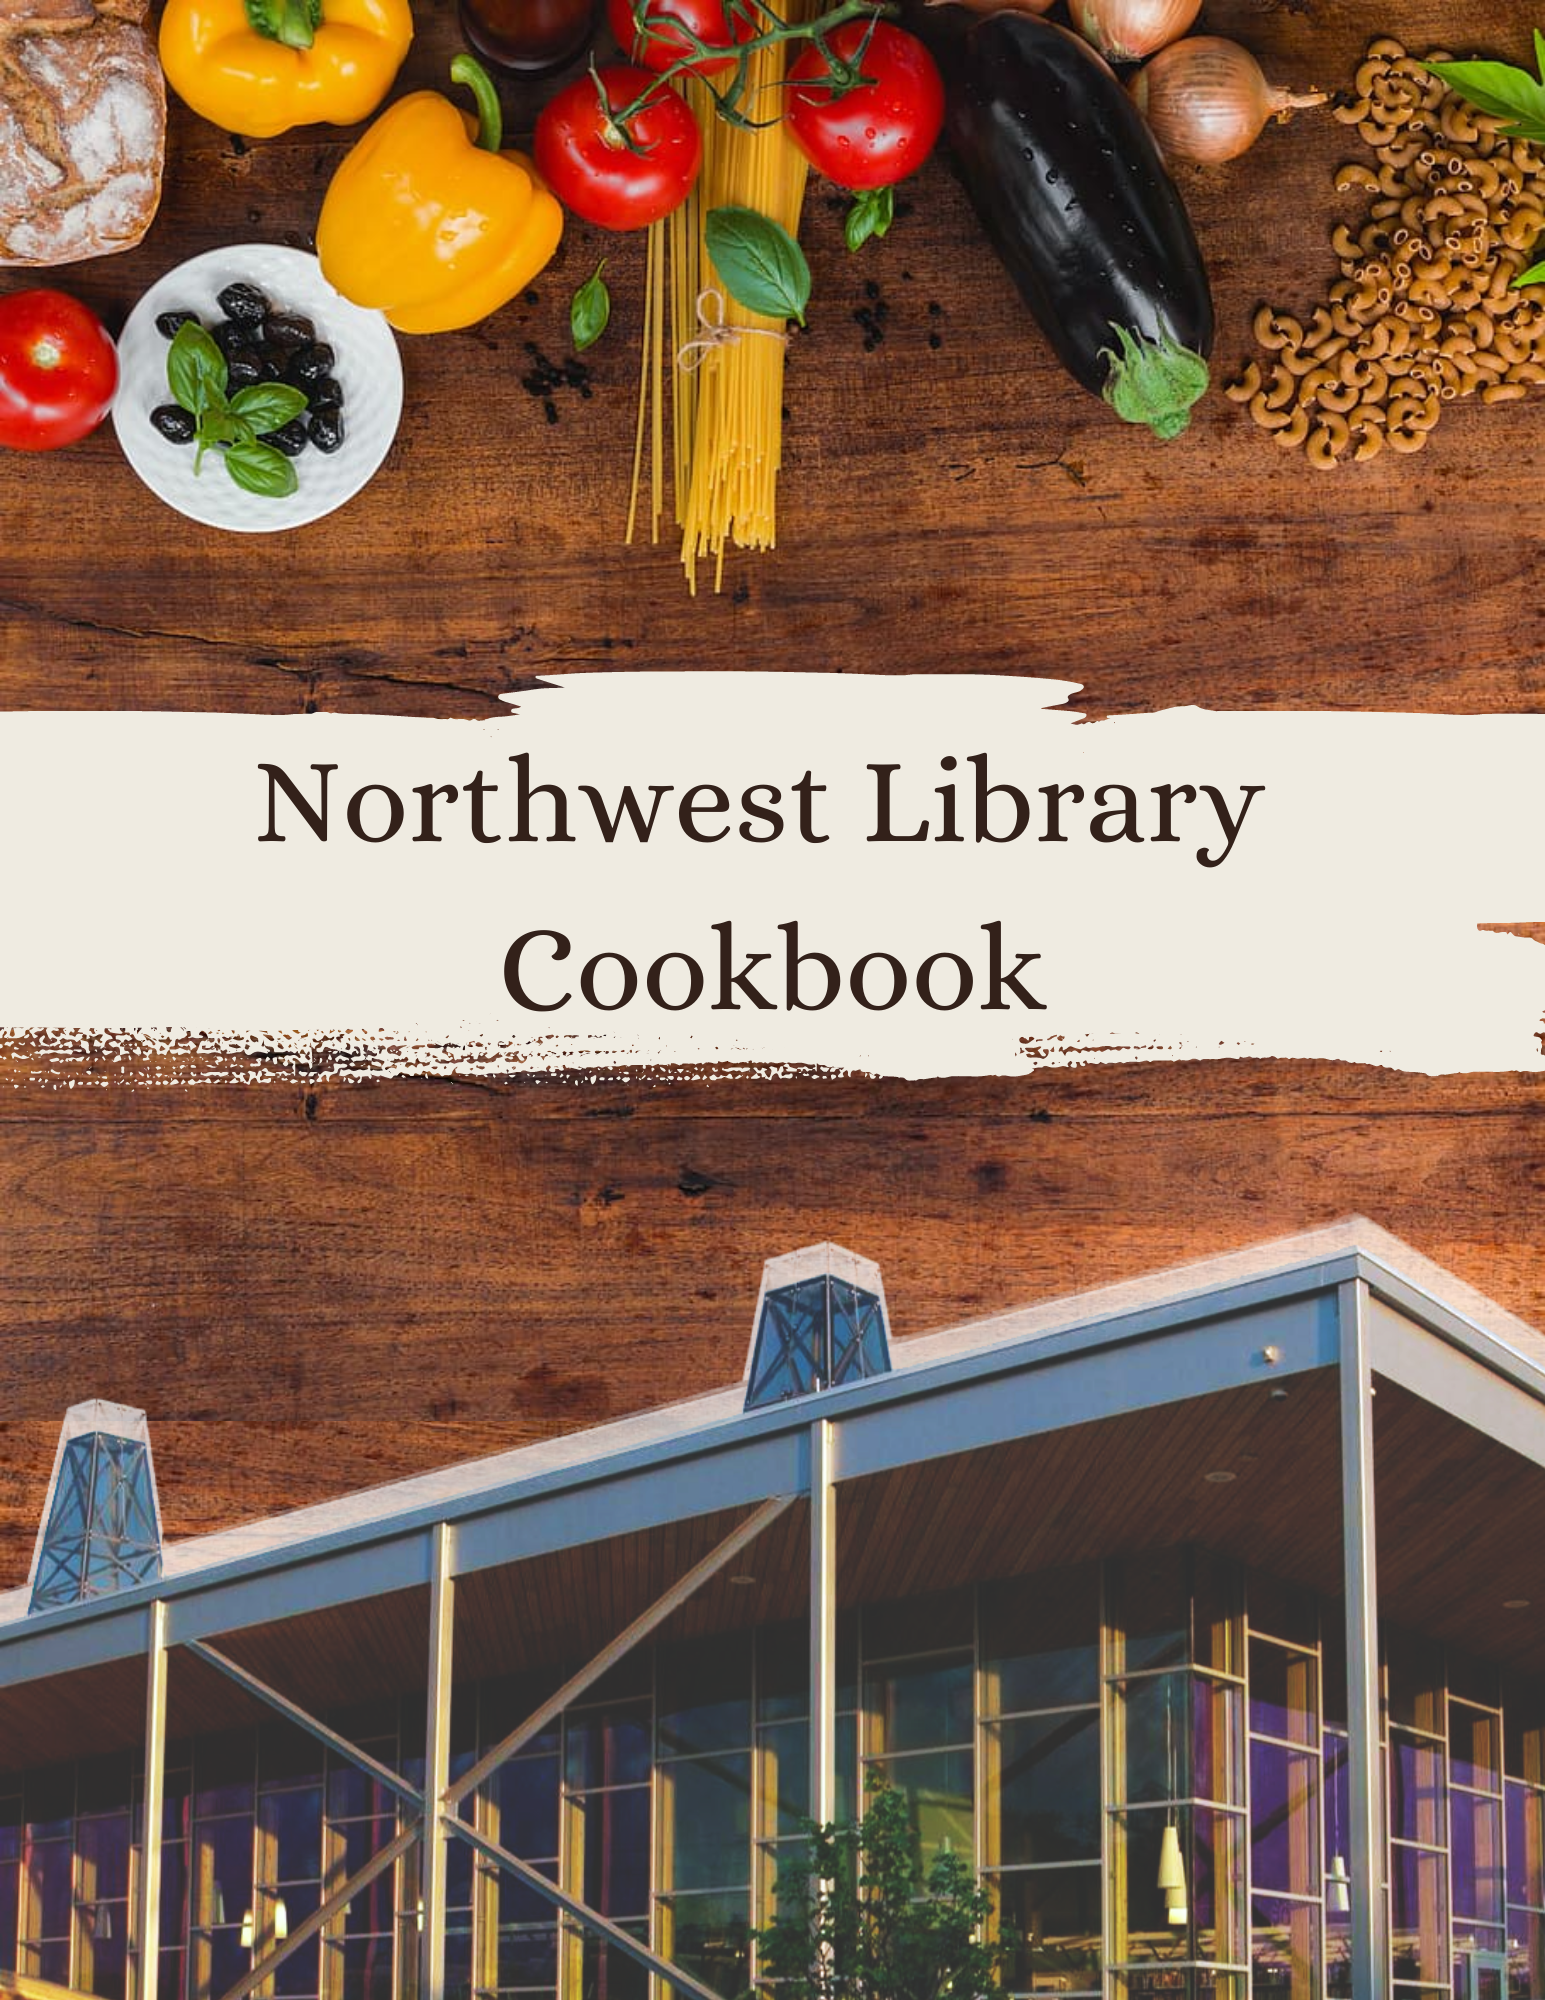 Community Cookbook Cover: Veggies and grains at the top with the NW library at the bottom.